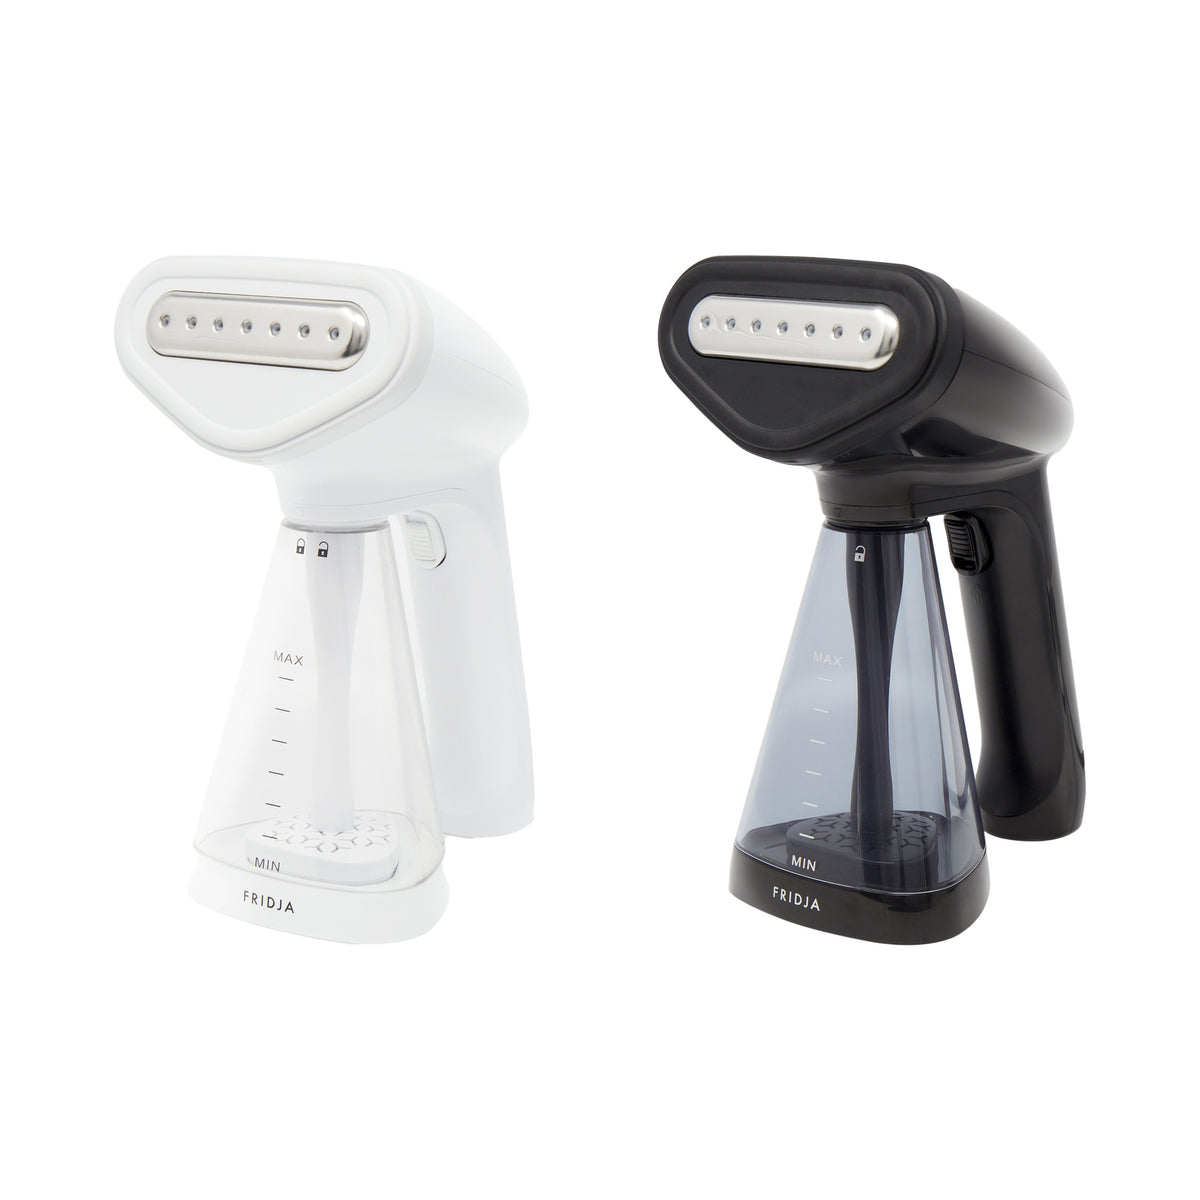 Two Fridja handheld clothes steamers on white background. One in white and the other in black